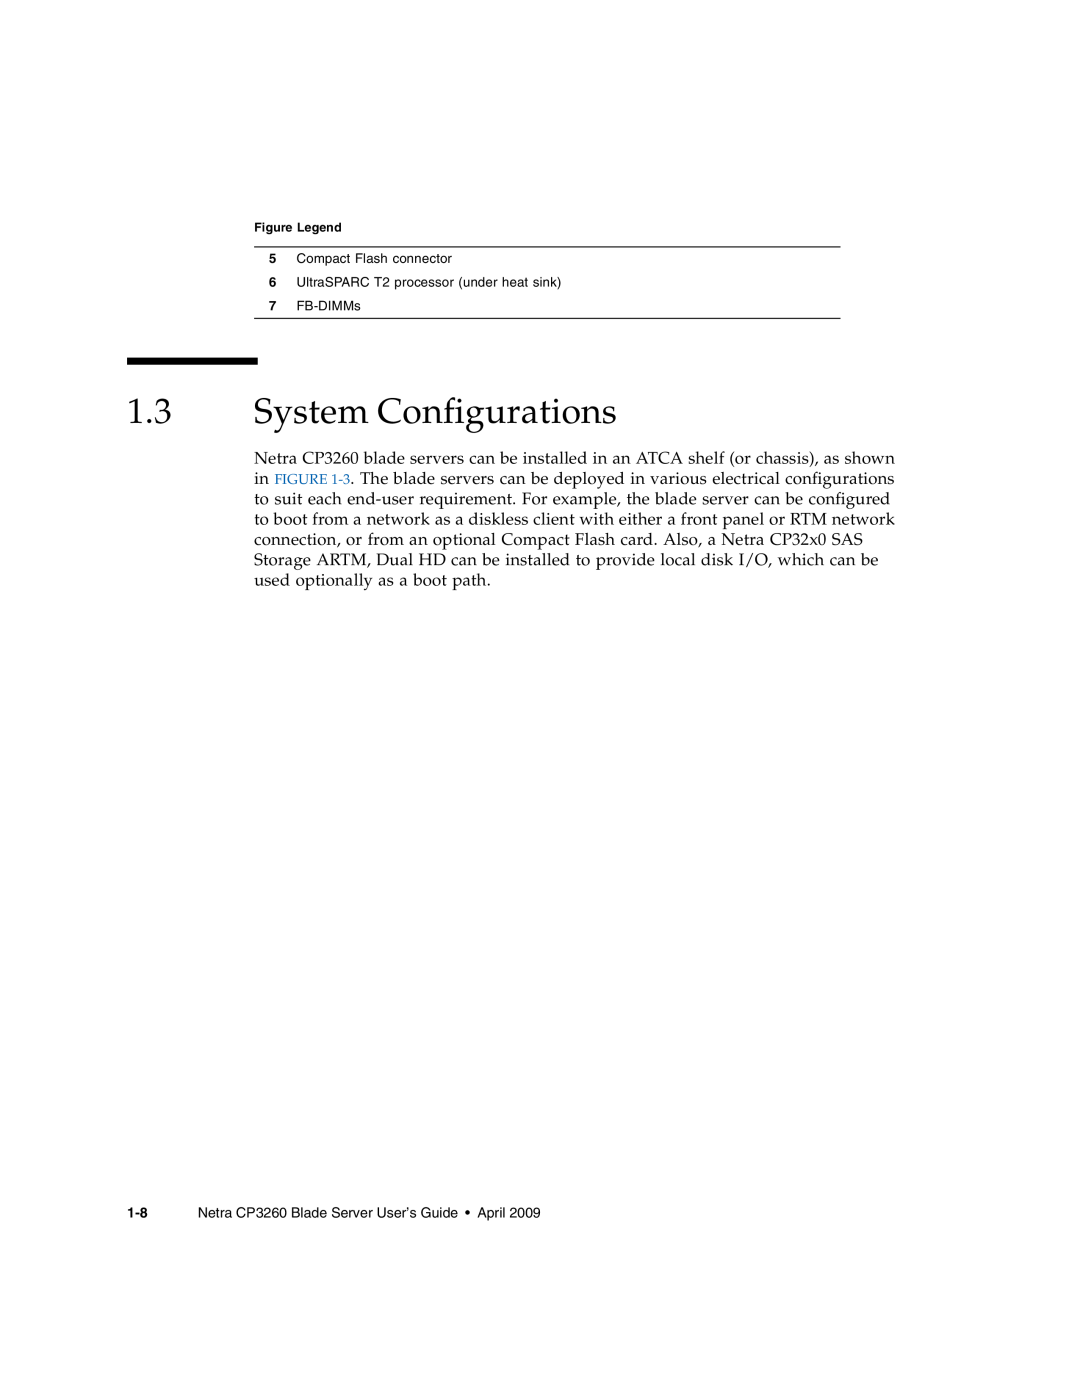 Sun Microsystems manual System Configurations, Netra CP3260 Blade Server User’s Guide April 